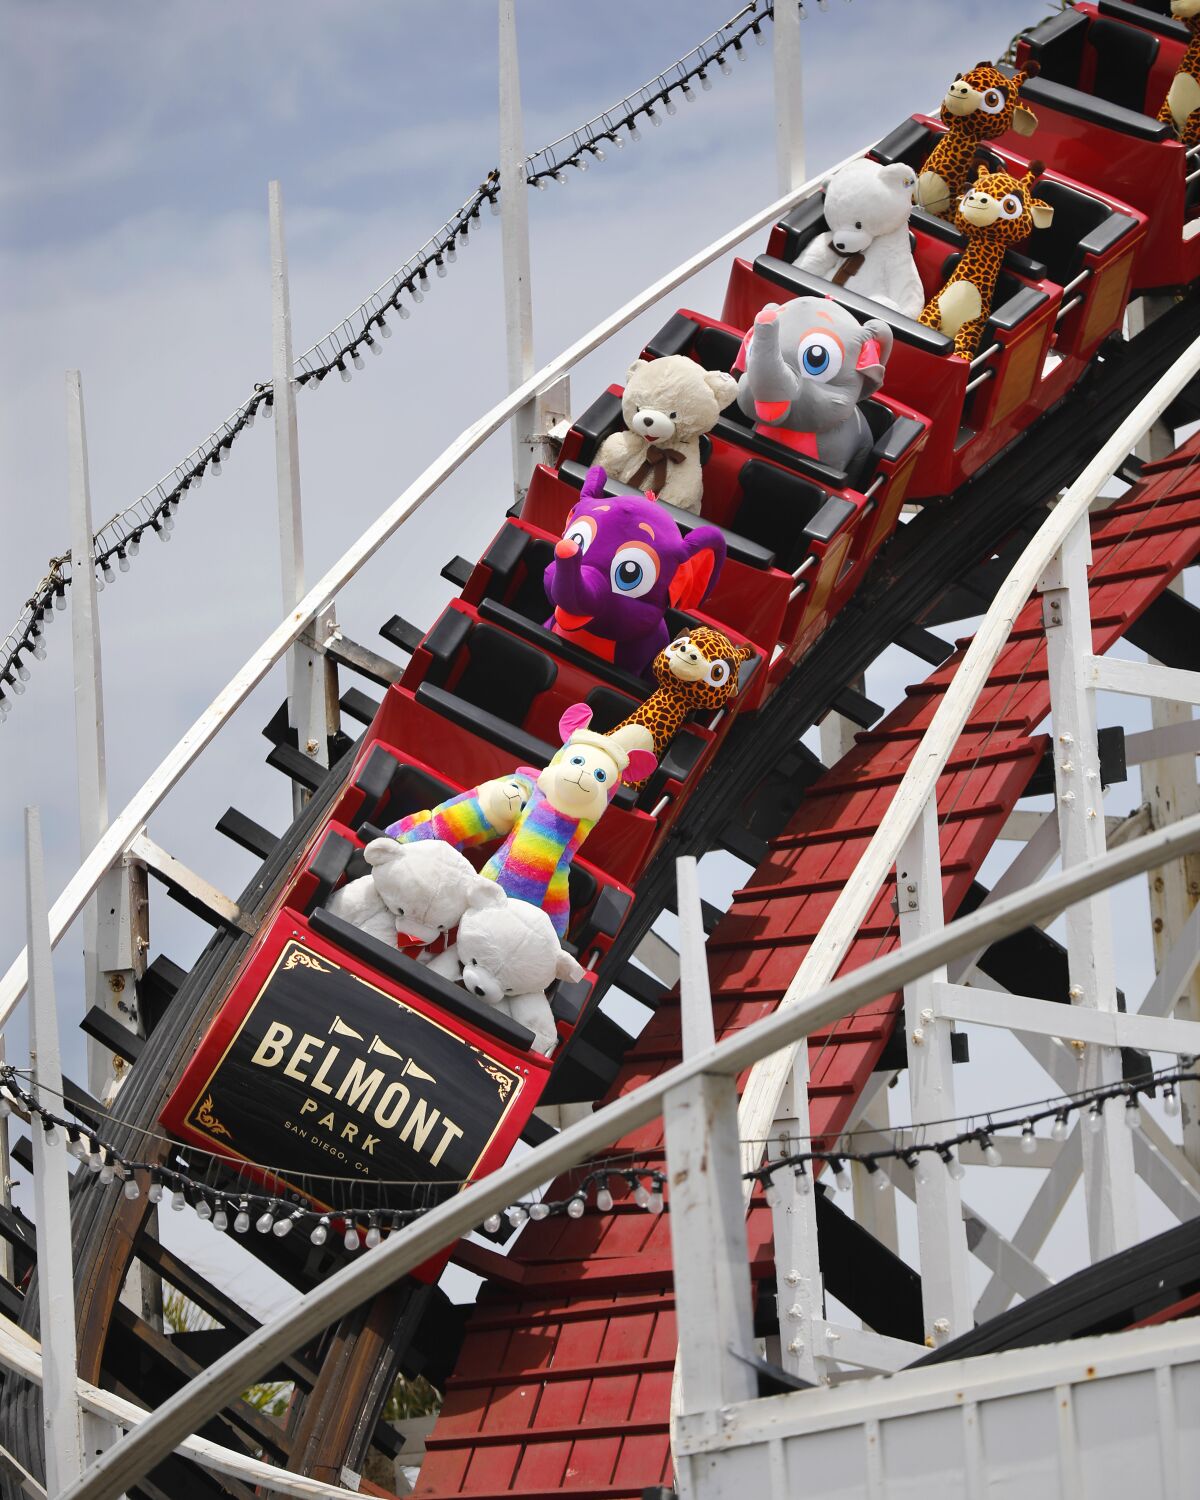 Stuffed animals ride the Giant Dipper roller coaster at Belmont Park in Mission Beach on June 1, 2020. The park has been running the coaster to keep it from tightening up during the recent closures.